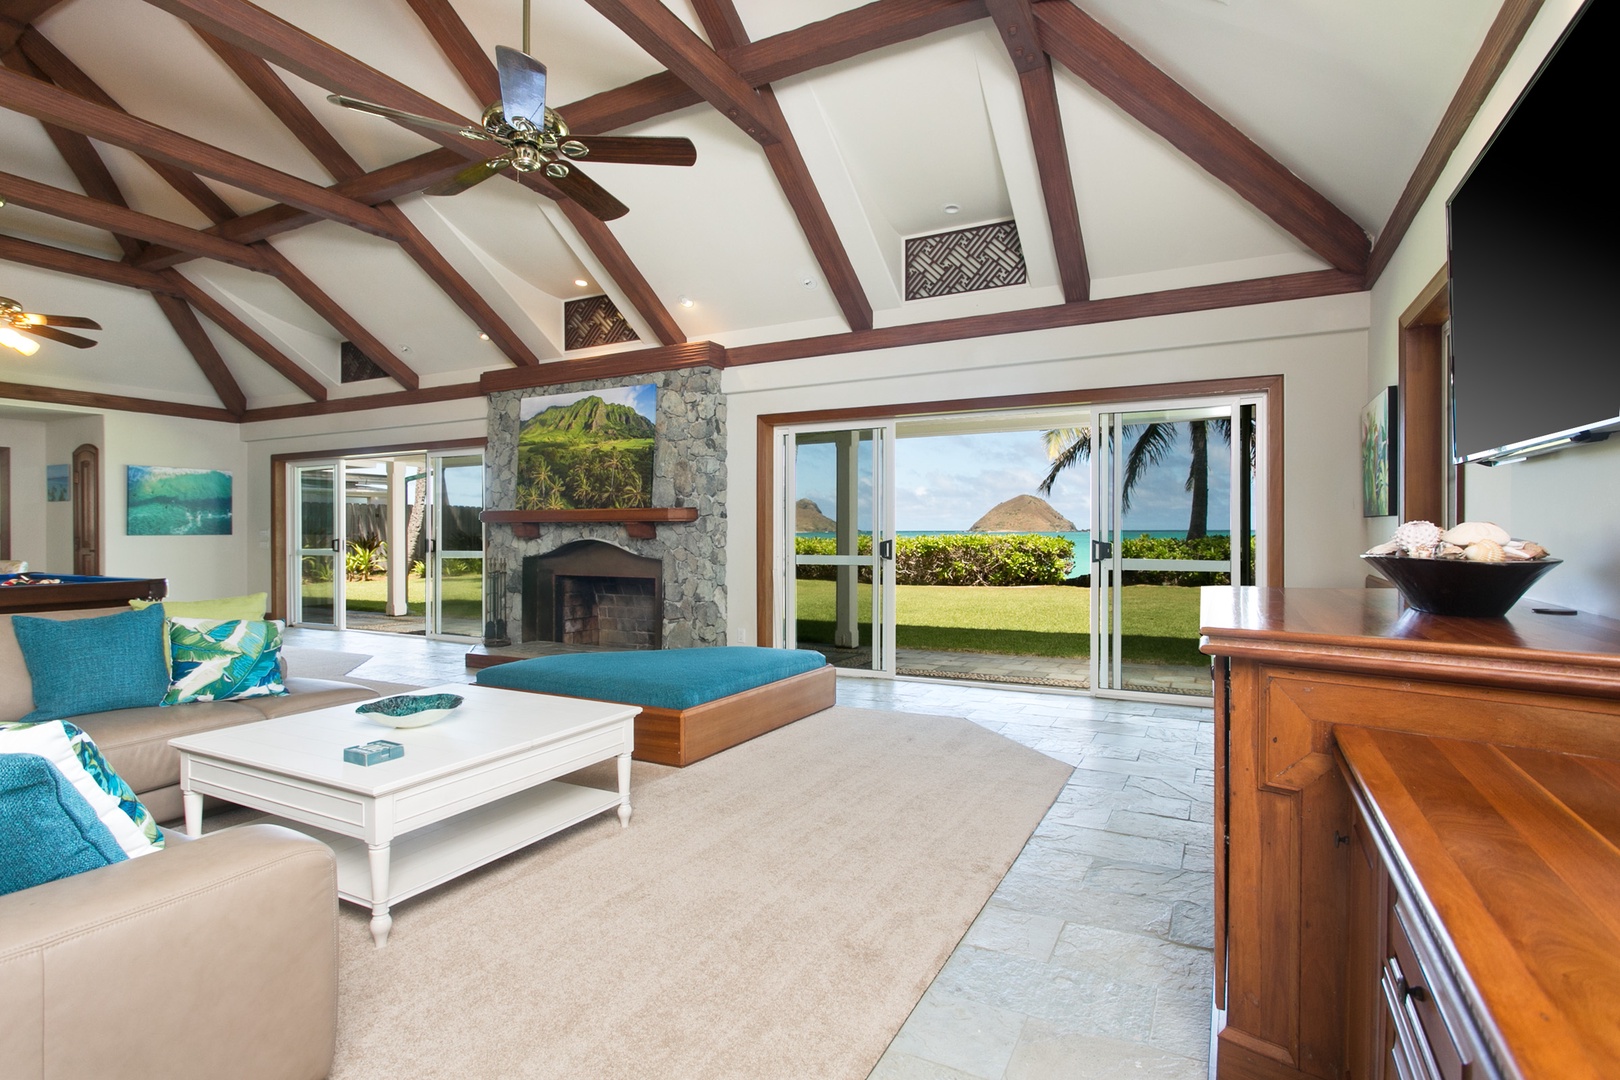 Kailua Vacation Rentals, Hale Melia* - Spacious and bright living area with elegant beams frame your gateway to ocean breezes.